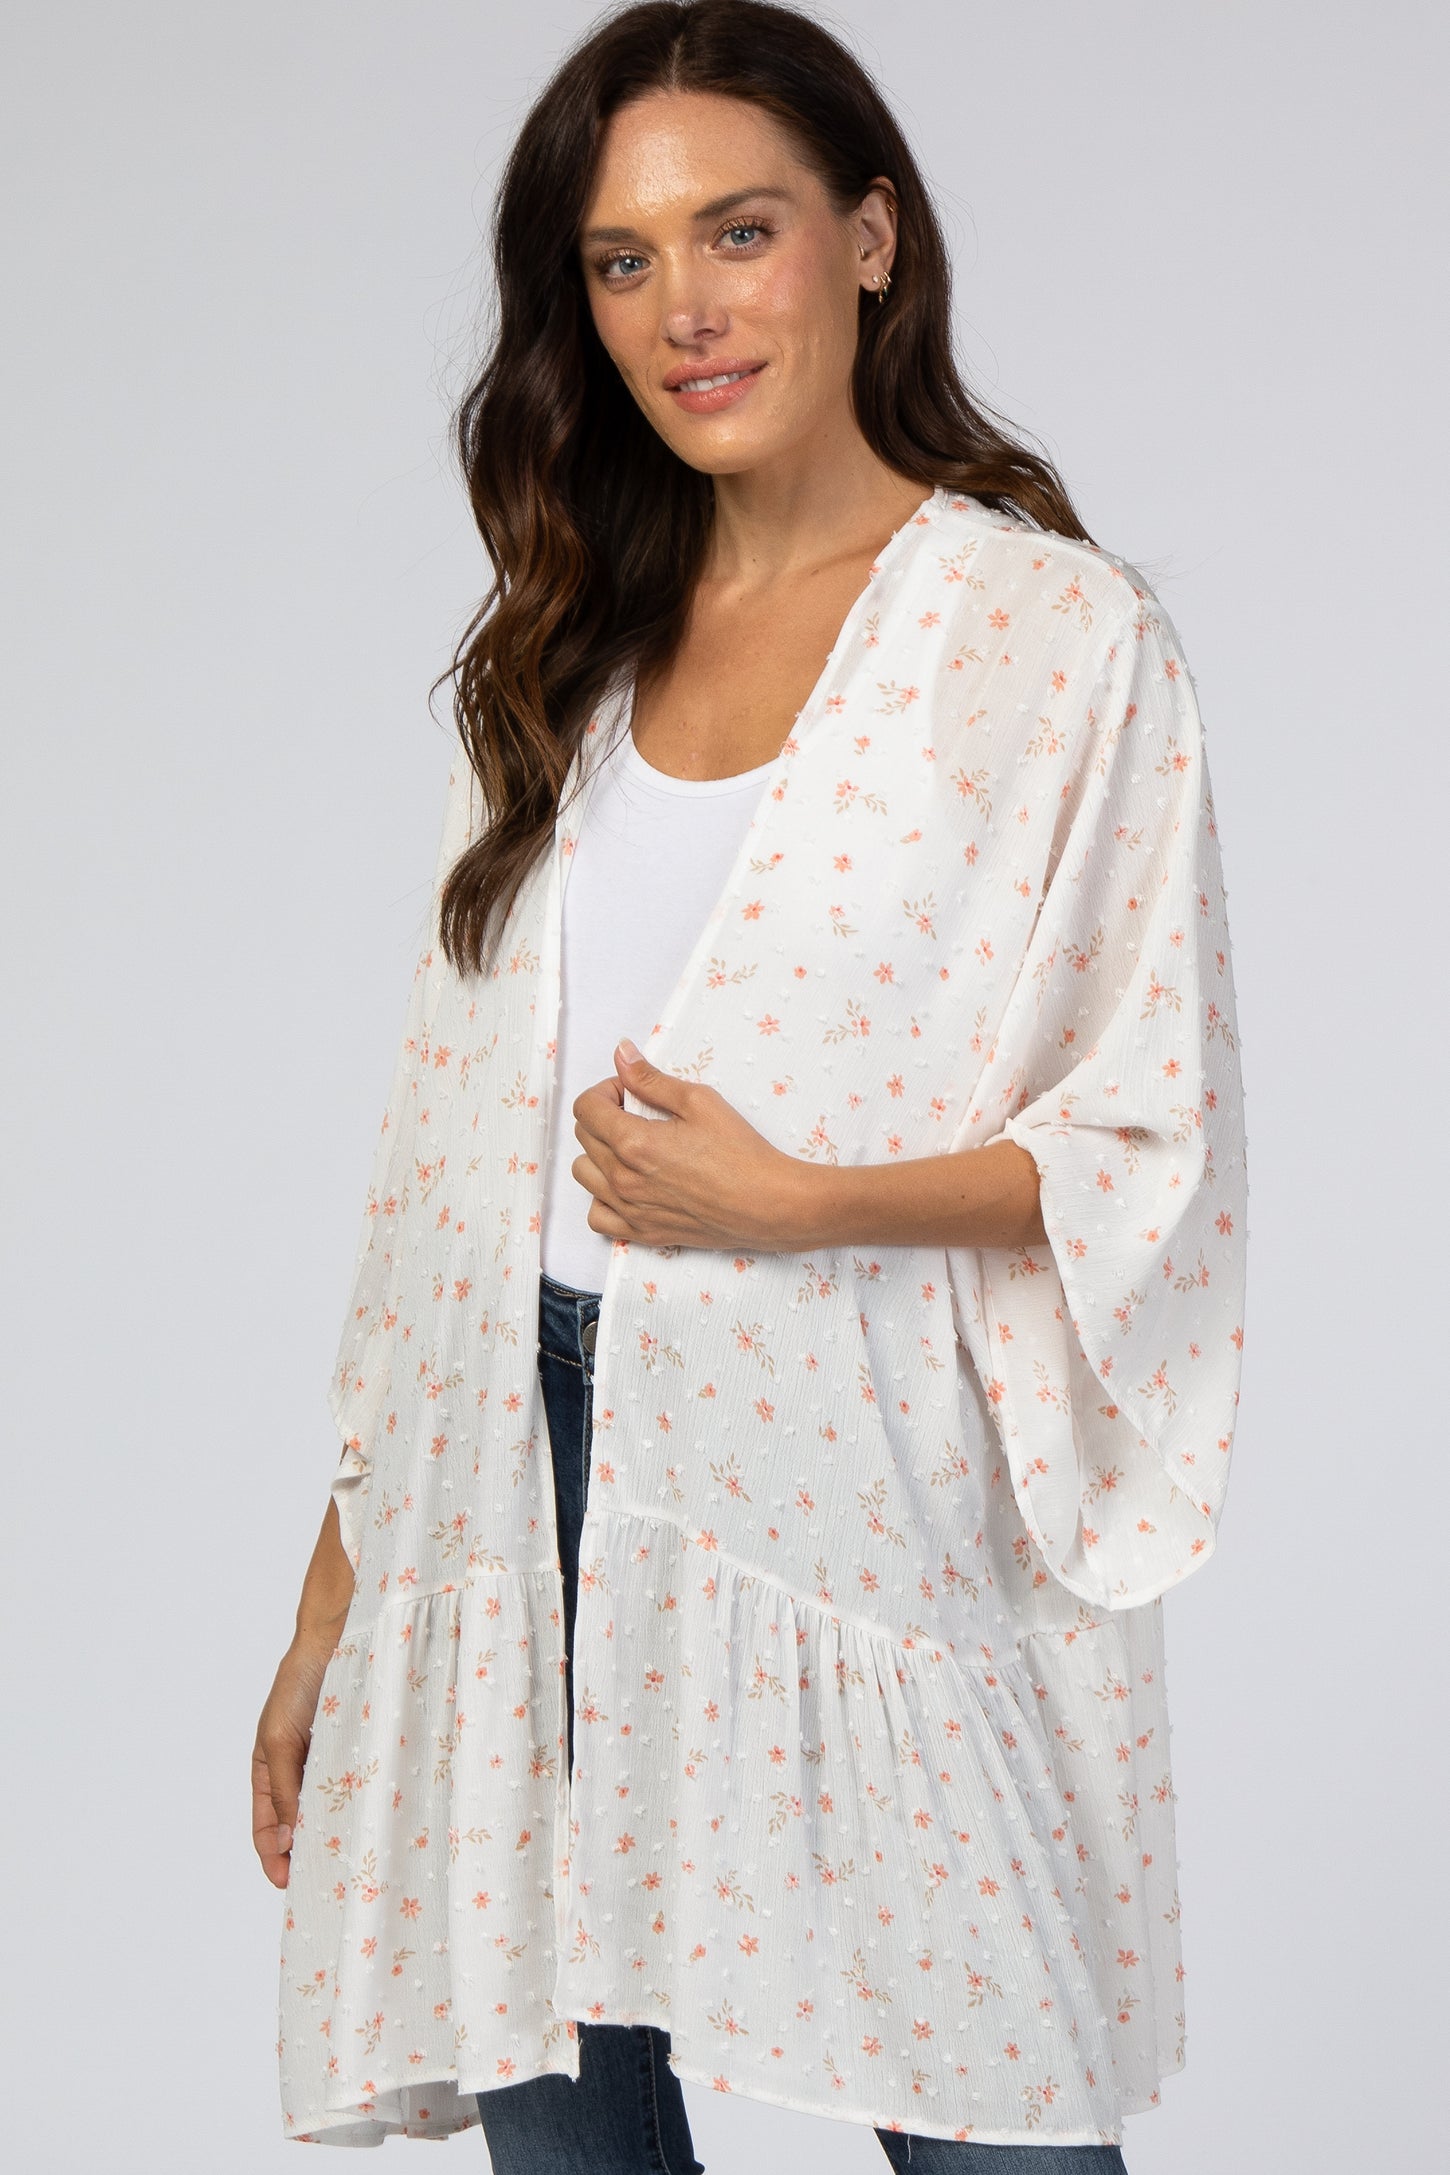 Ivory Floral Swiss Dot Ruffle Hem Cover Up